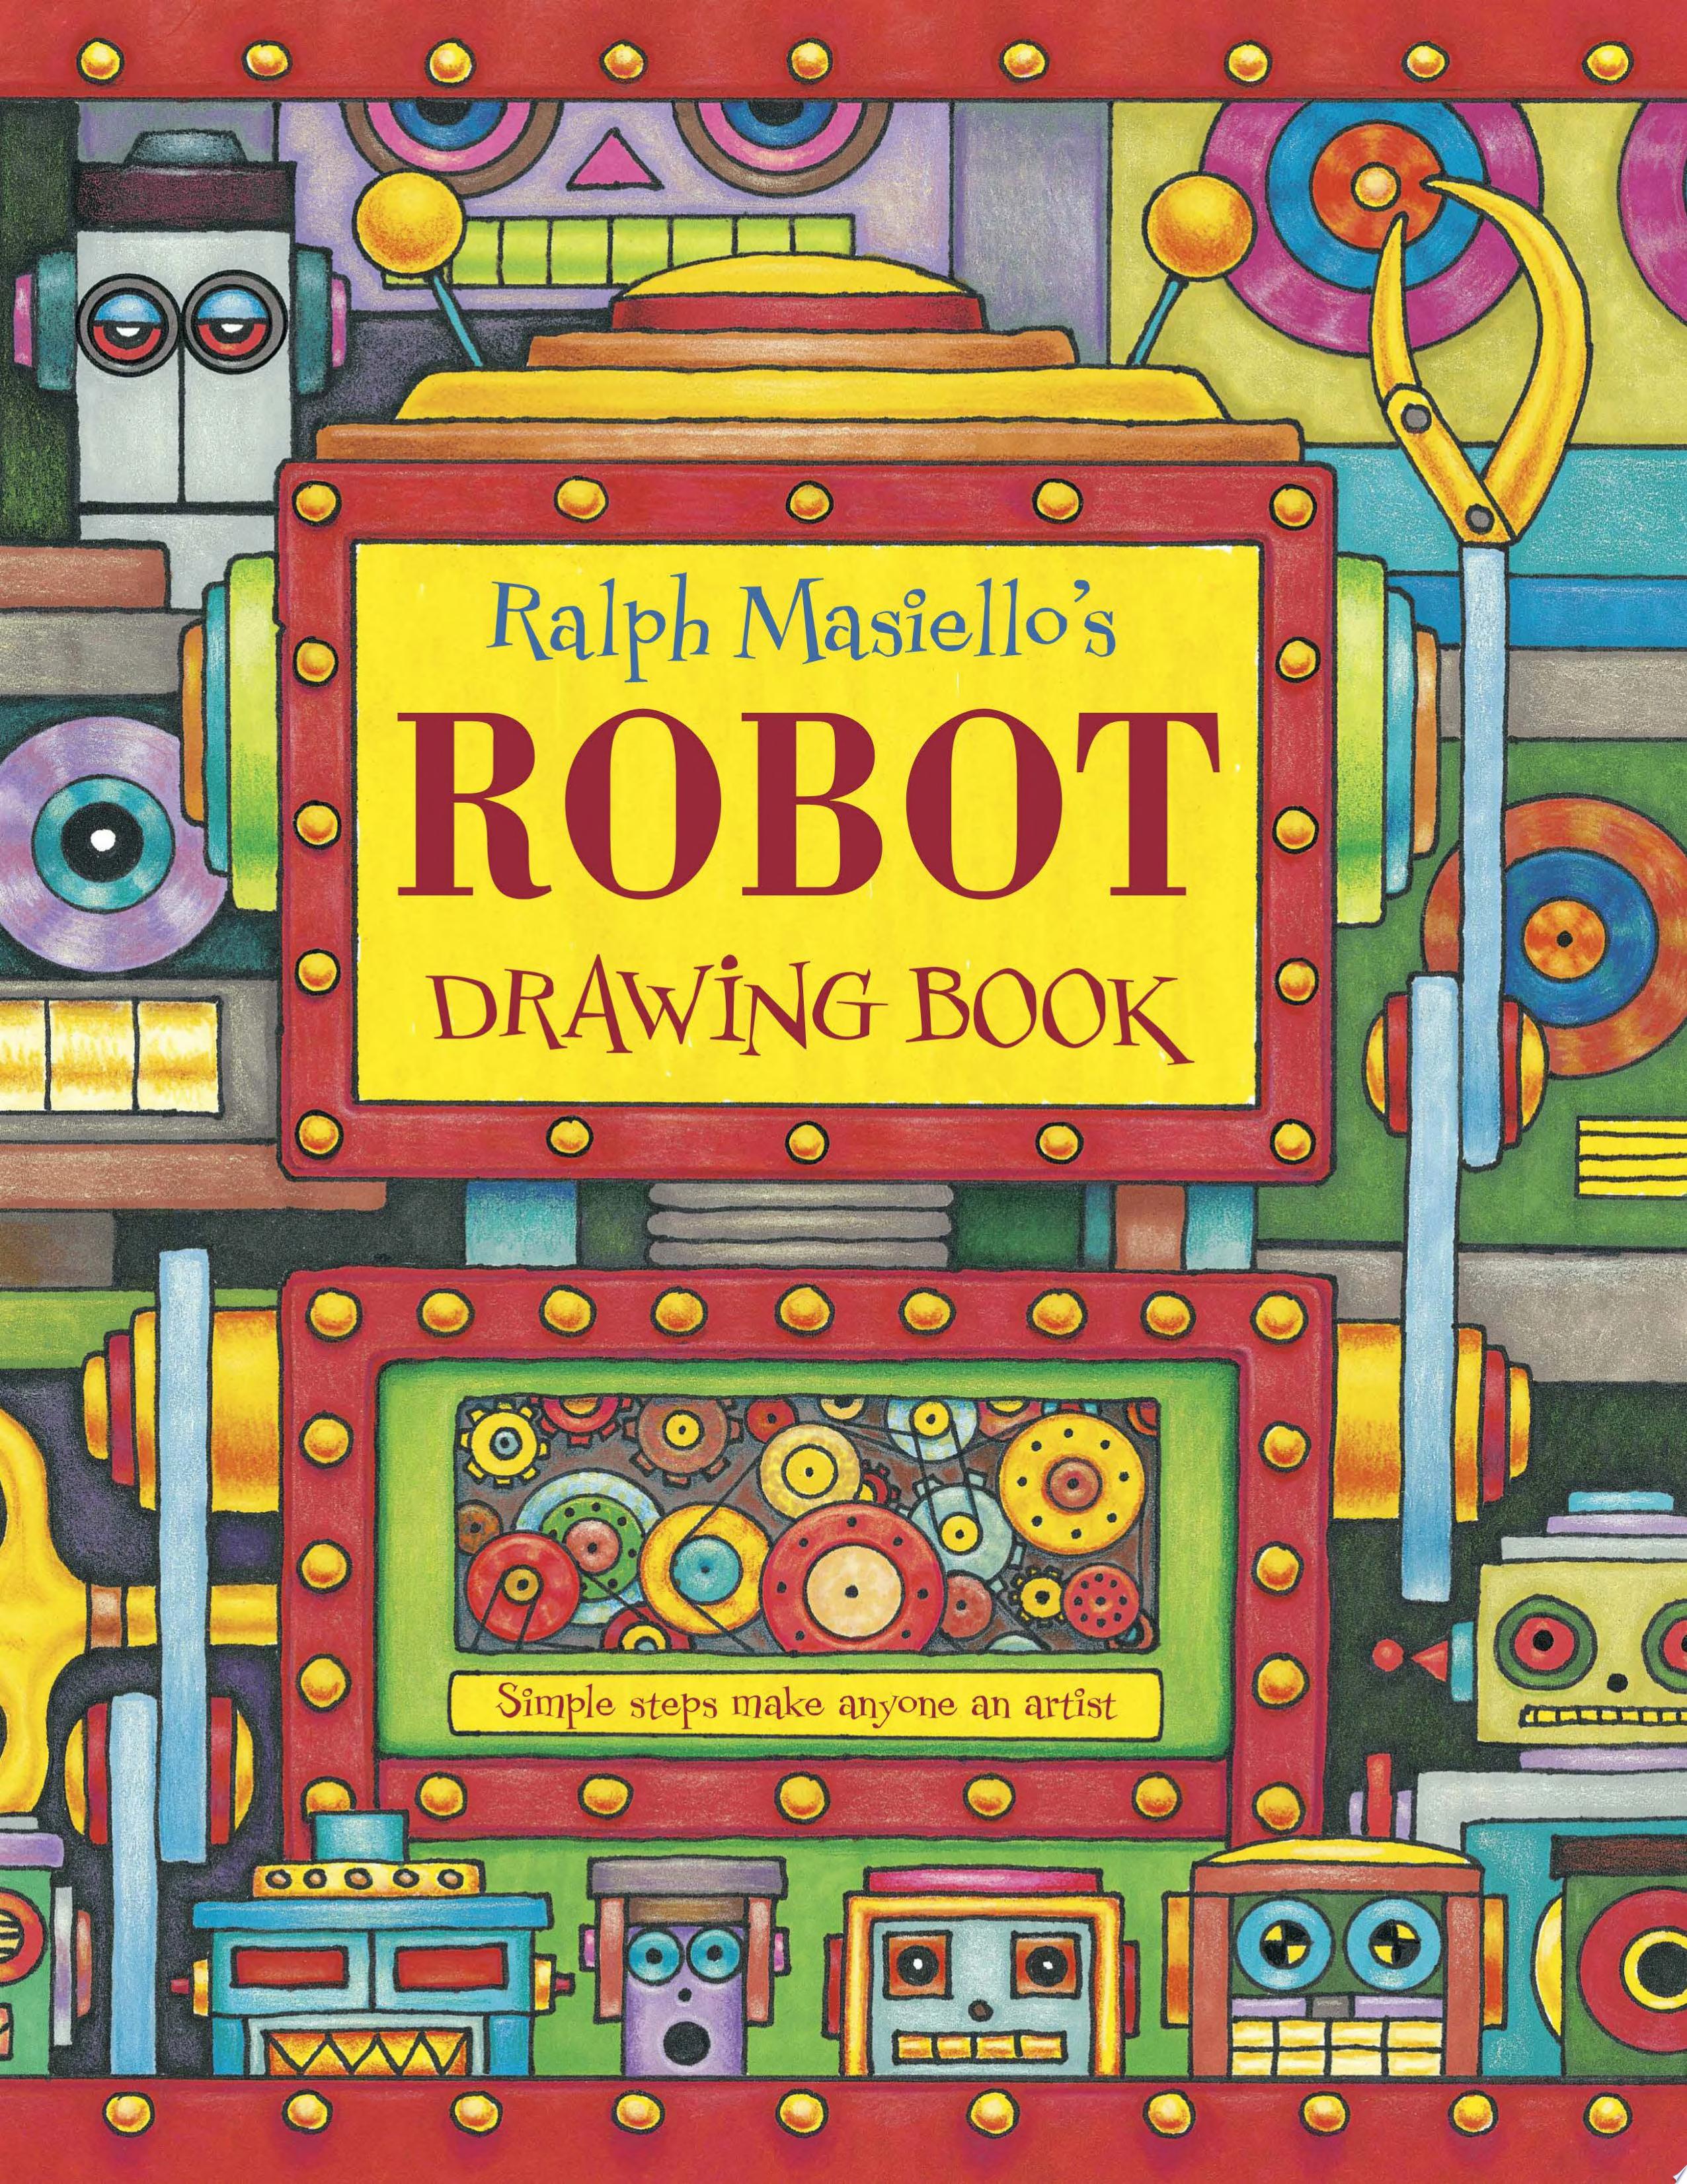 Image for "Ralph Masiello's Robot Drawing Book"